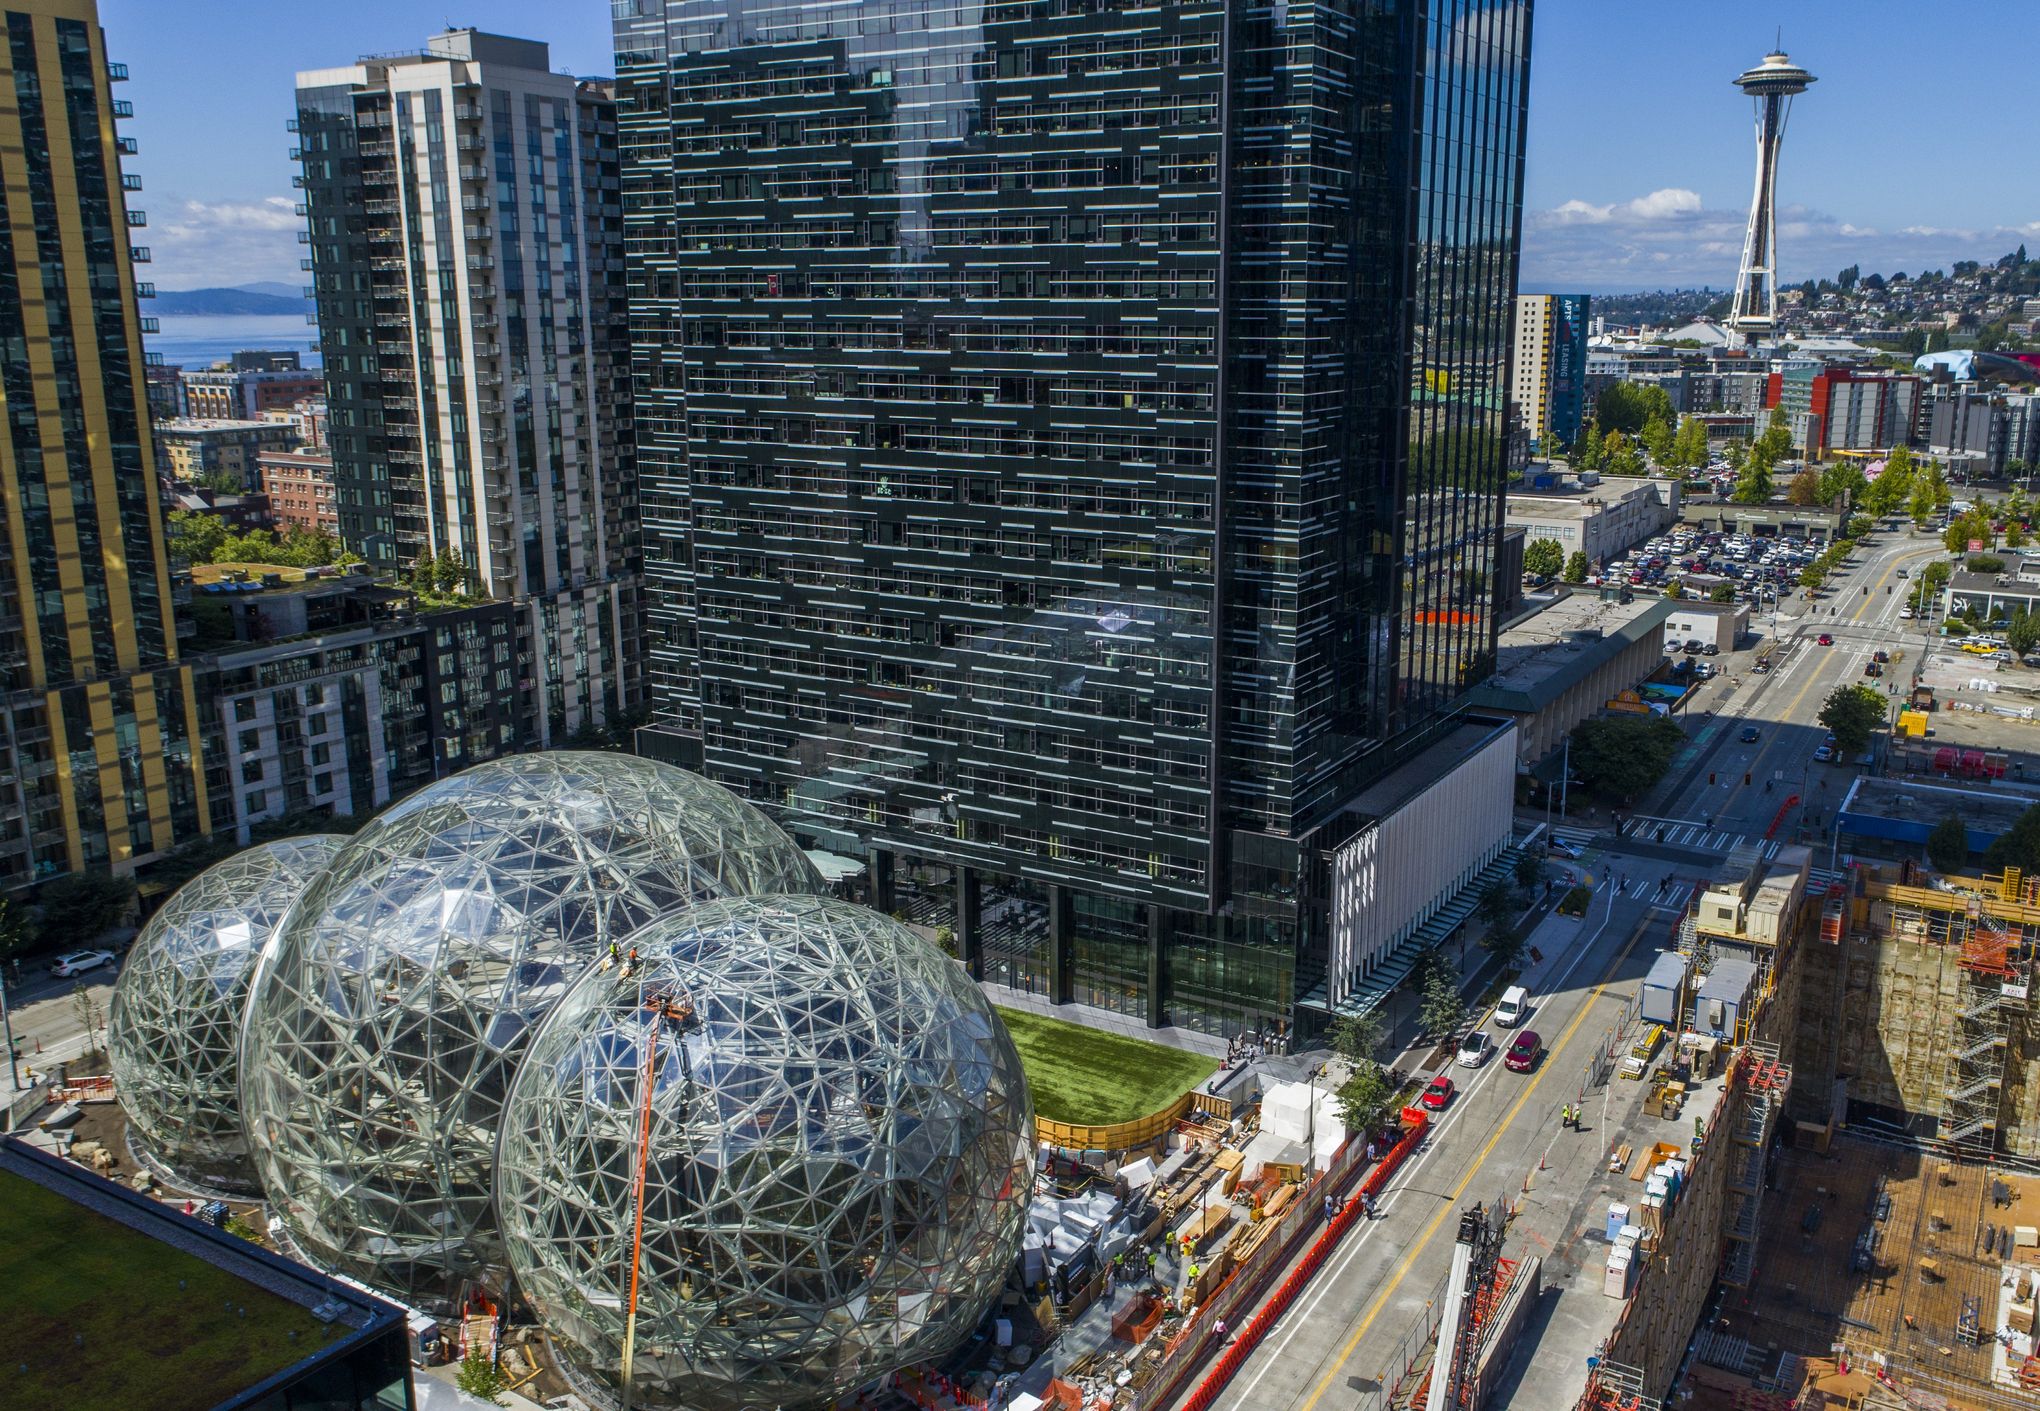 Amazon Flexes Its Muscle: Seattle Curbs Corporate Political Influence